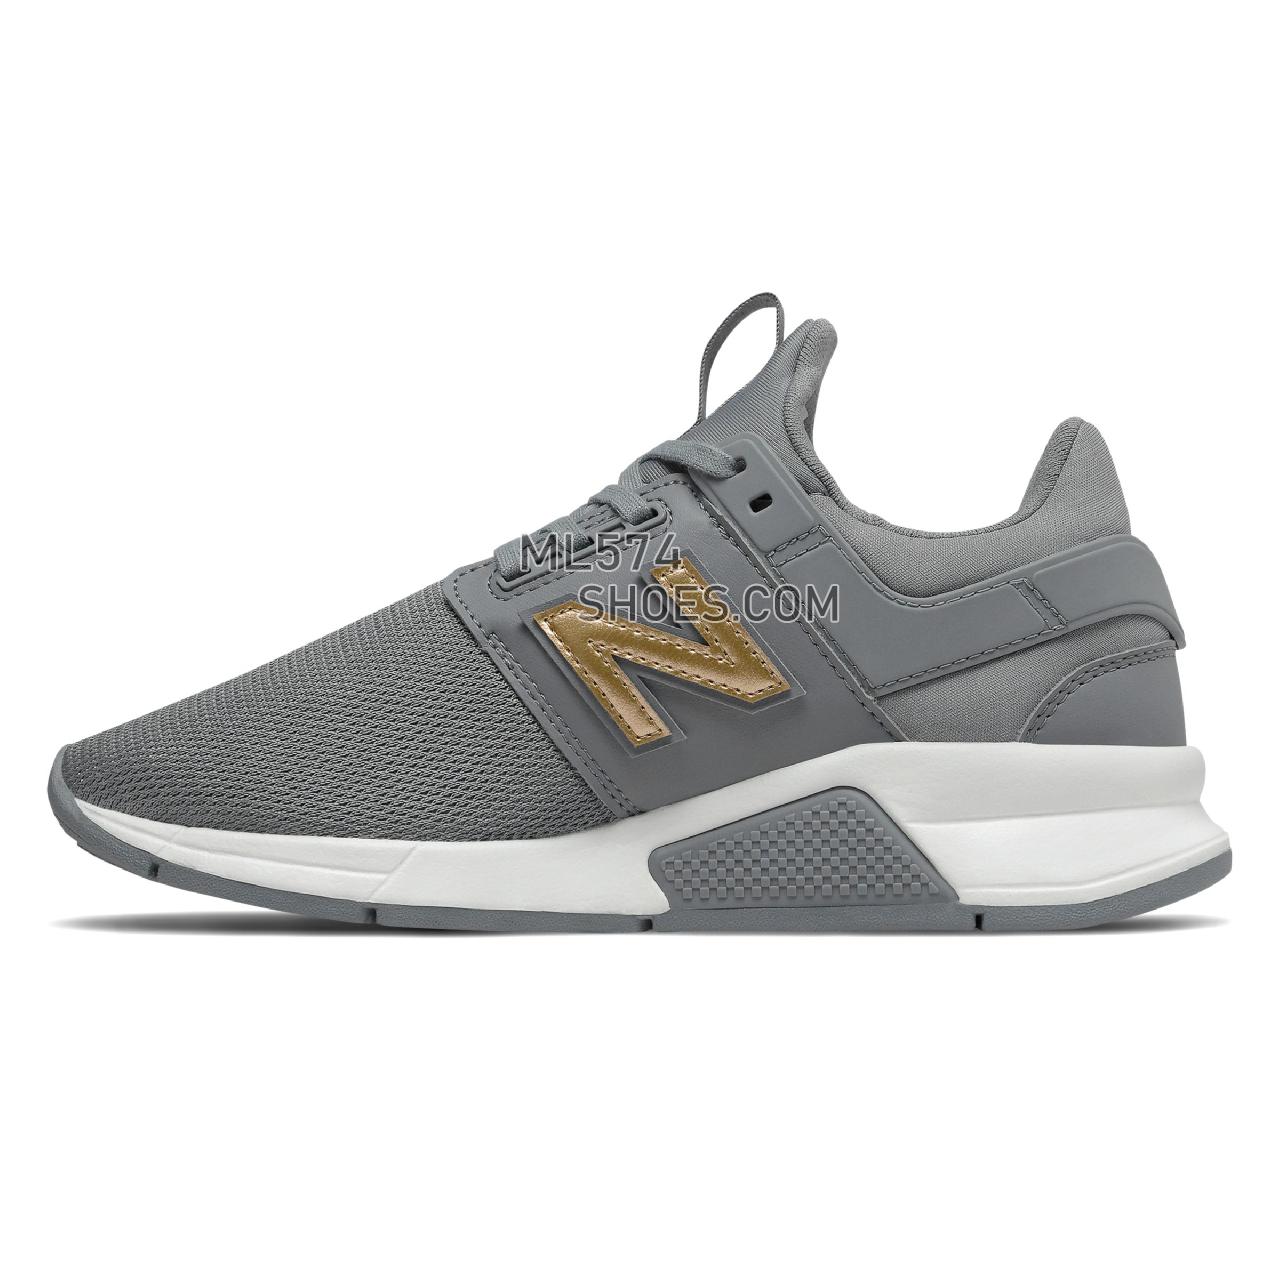 New Balance 247 - Women's Sport Style Sneakers - Gunmetal with Gold Metallic - WS247CNF